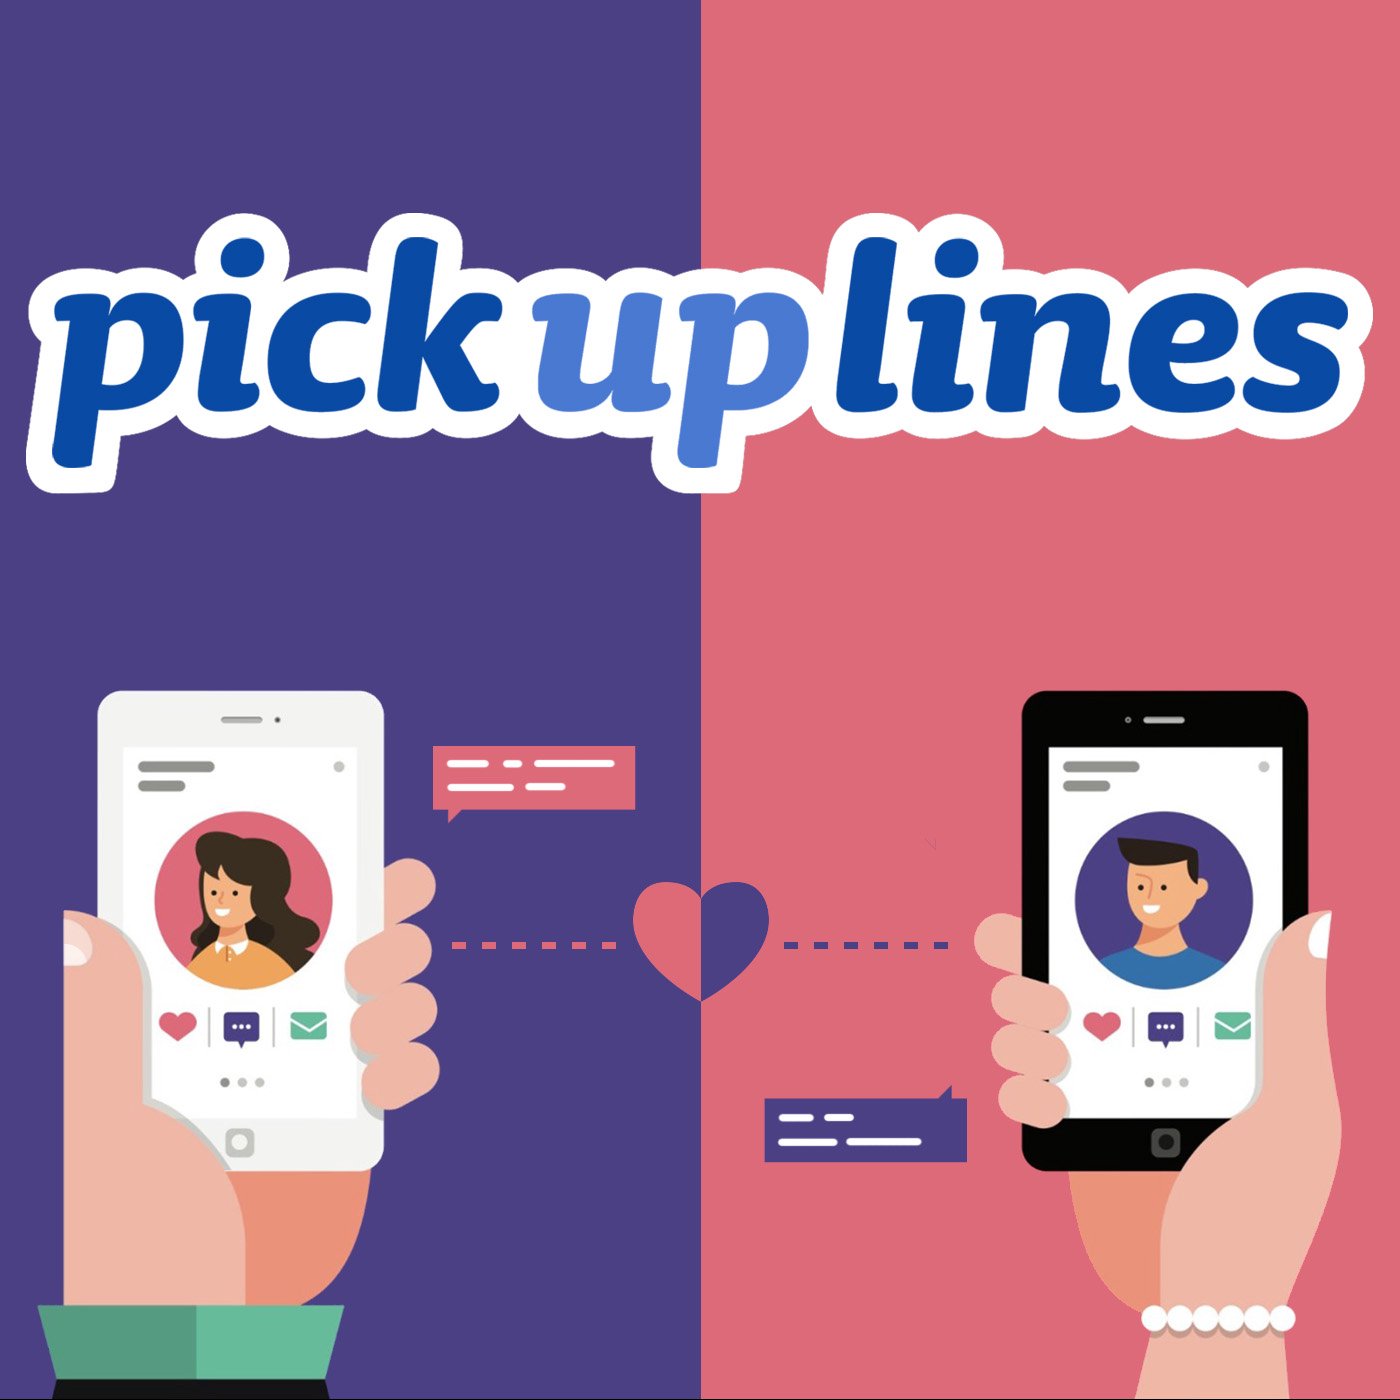 PICK-UP LINES: The Art of Attraction